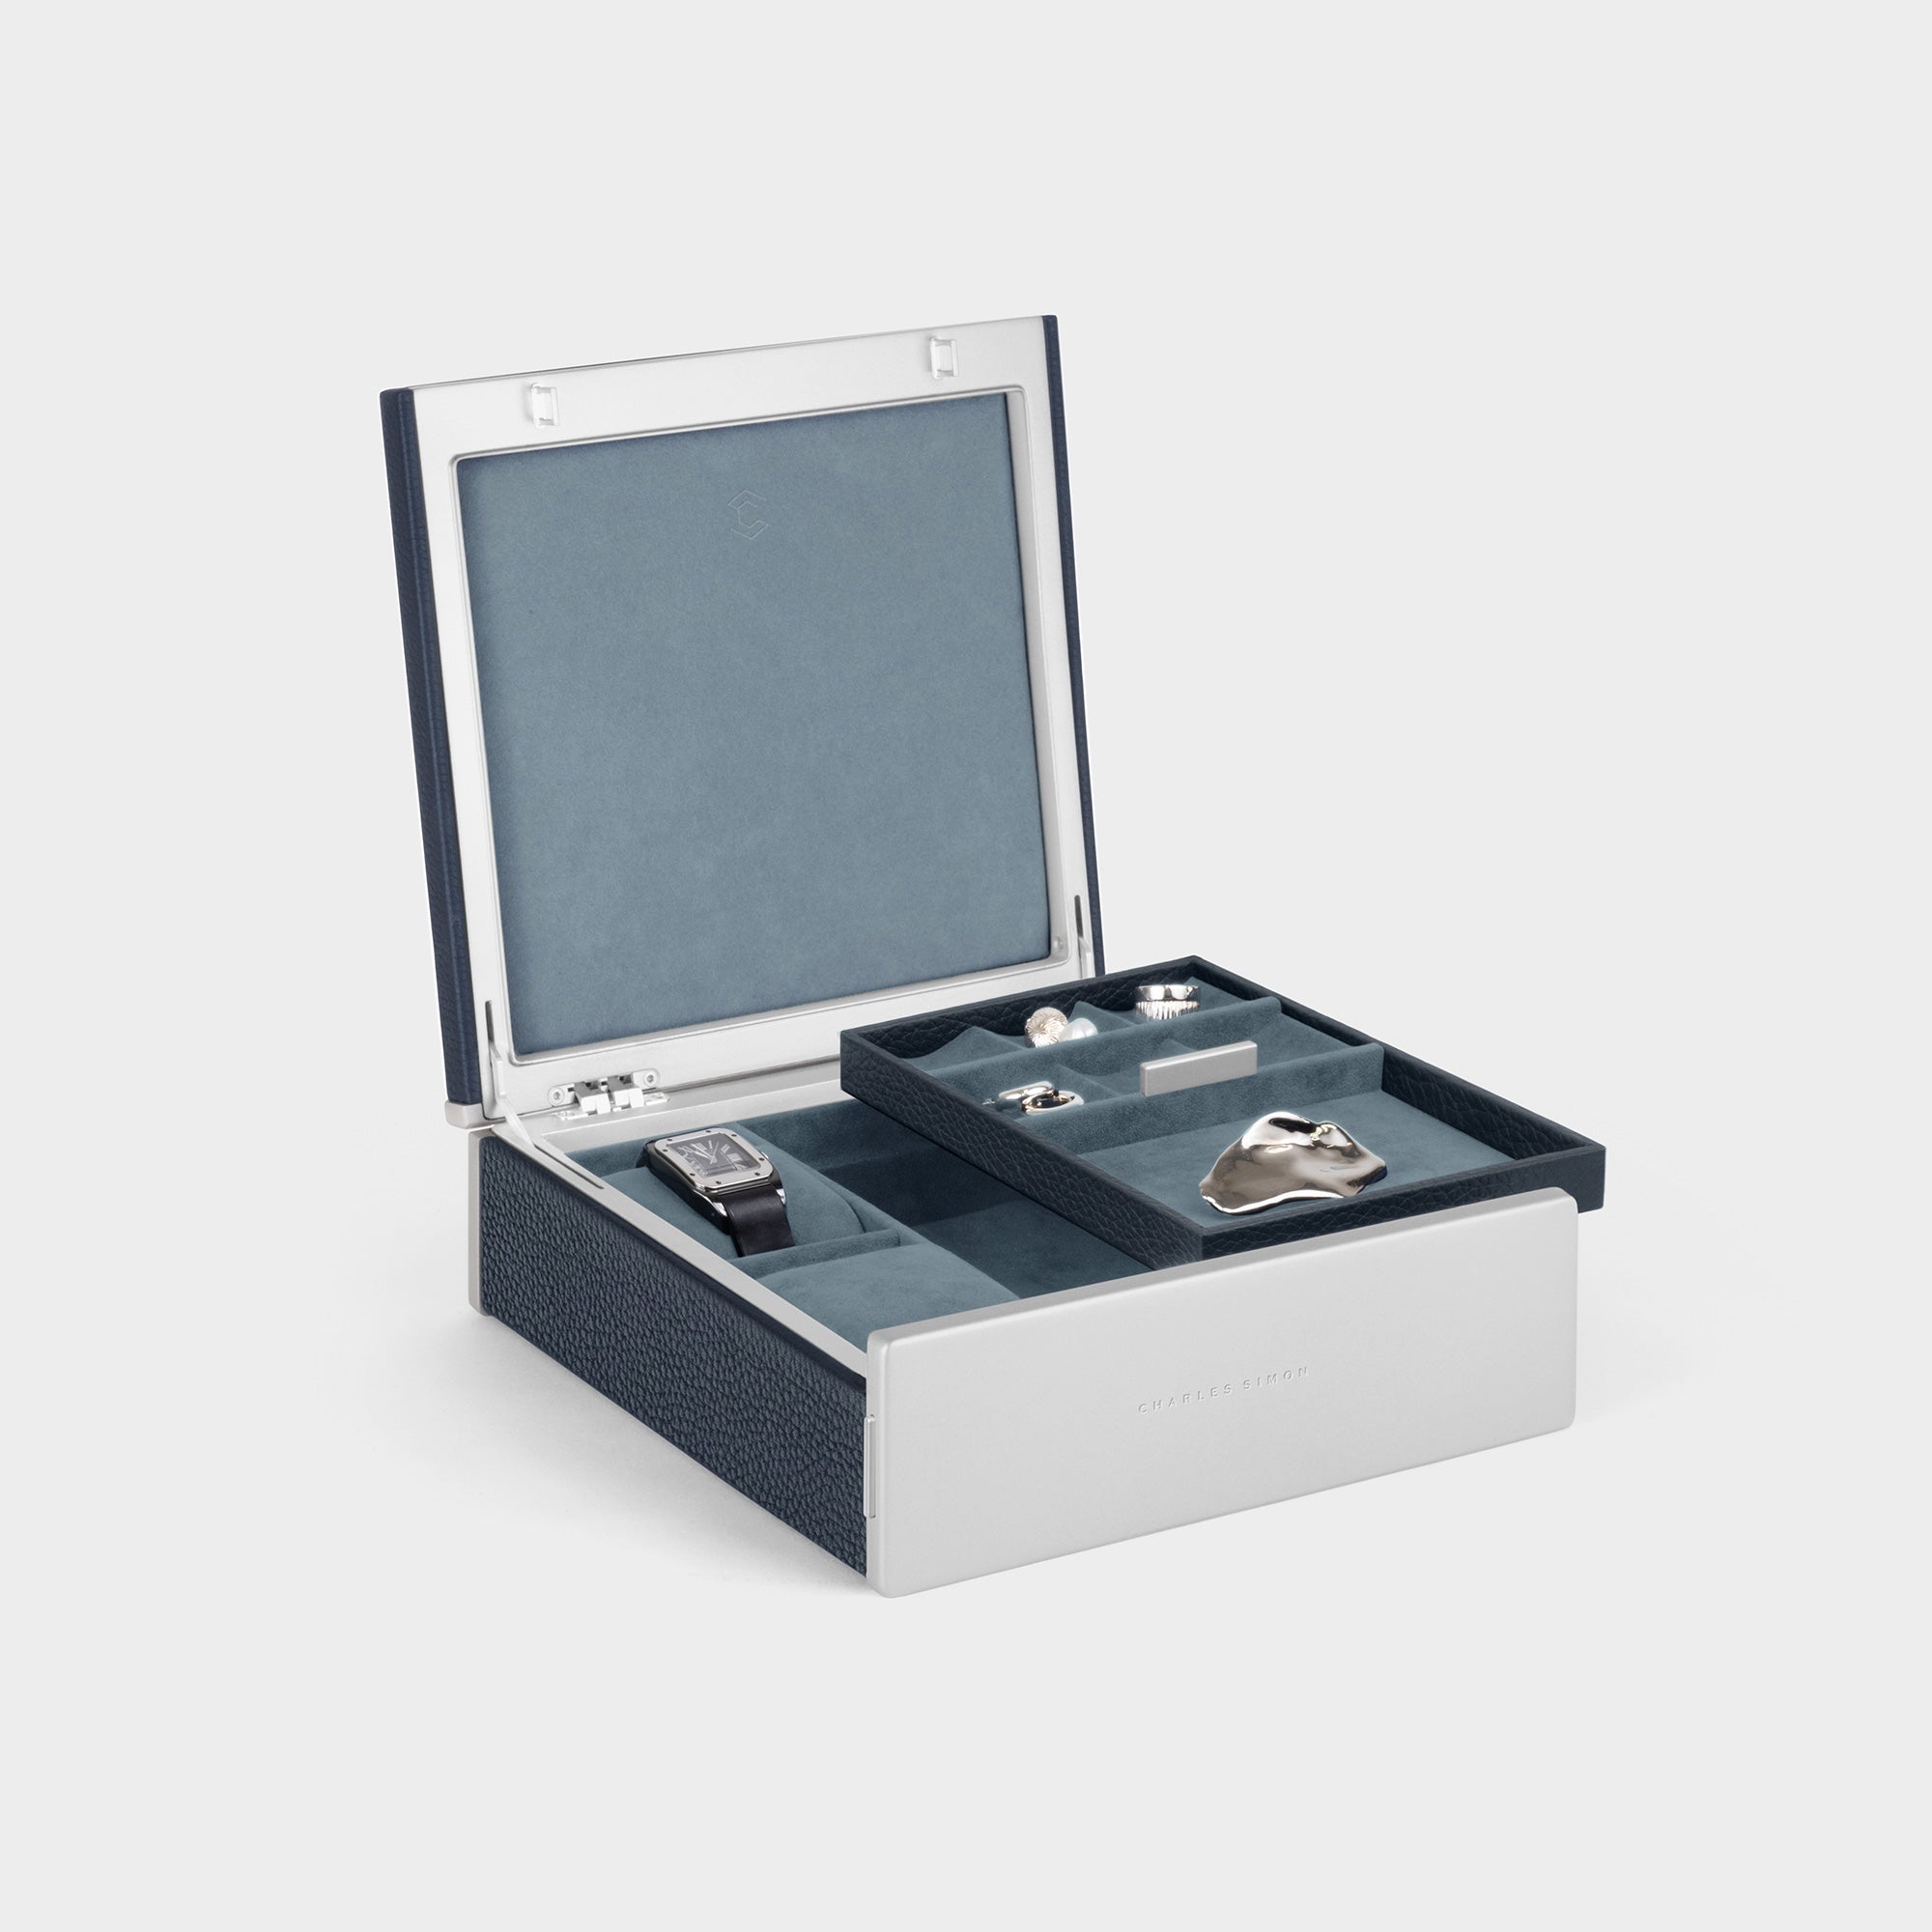 Product photo of open Taylor 2 Watch and Jewelry box in marine leather, highlighting the removable jewelry tray that serves to organize and store rings, earrings, bracelets and more.